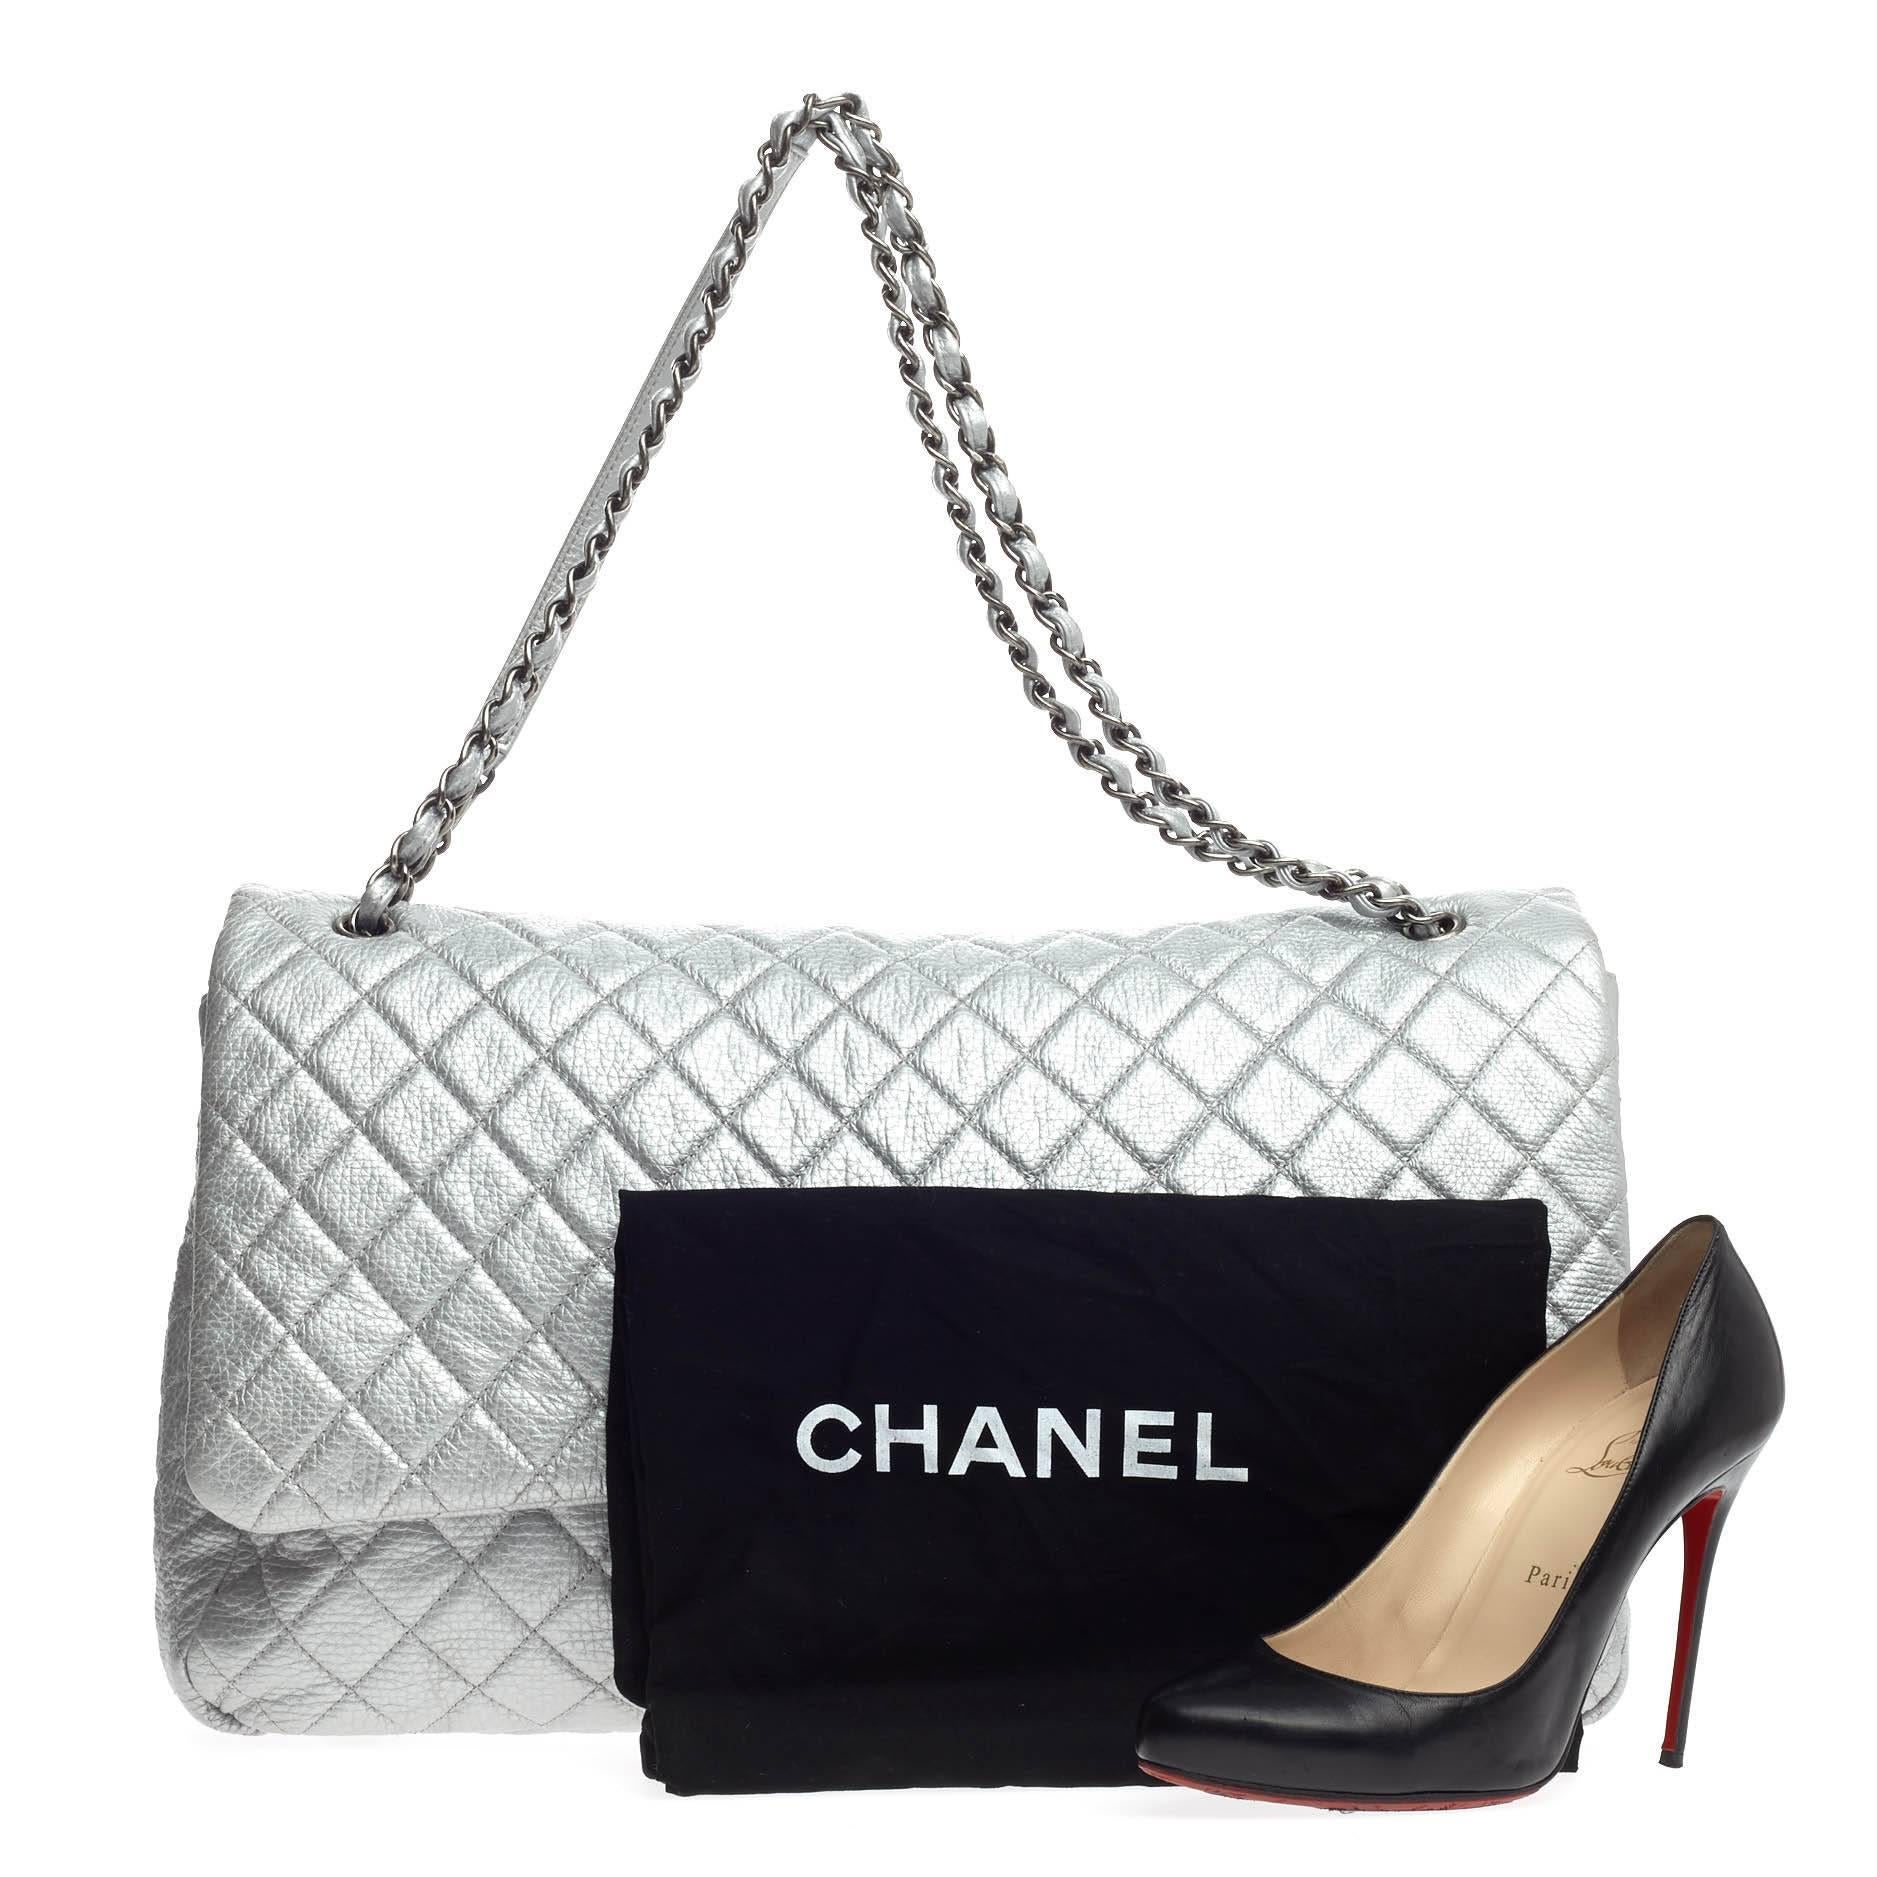 This authentic Chanel Airlines CC Flap Quilted Calfskin XXL presented in Chanel Spring/Summer 2016 Act 2 Collection is an oversized travel beauty made for all Chanel lovers. Crafted in metallic silver in its signature diamond quilted design, this